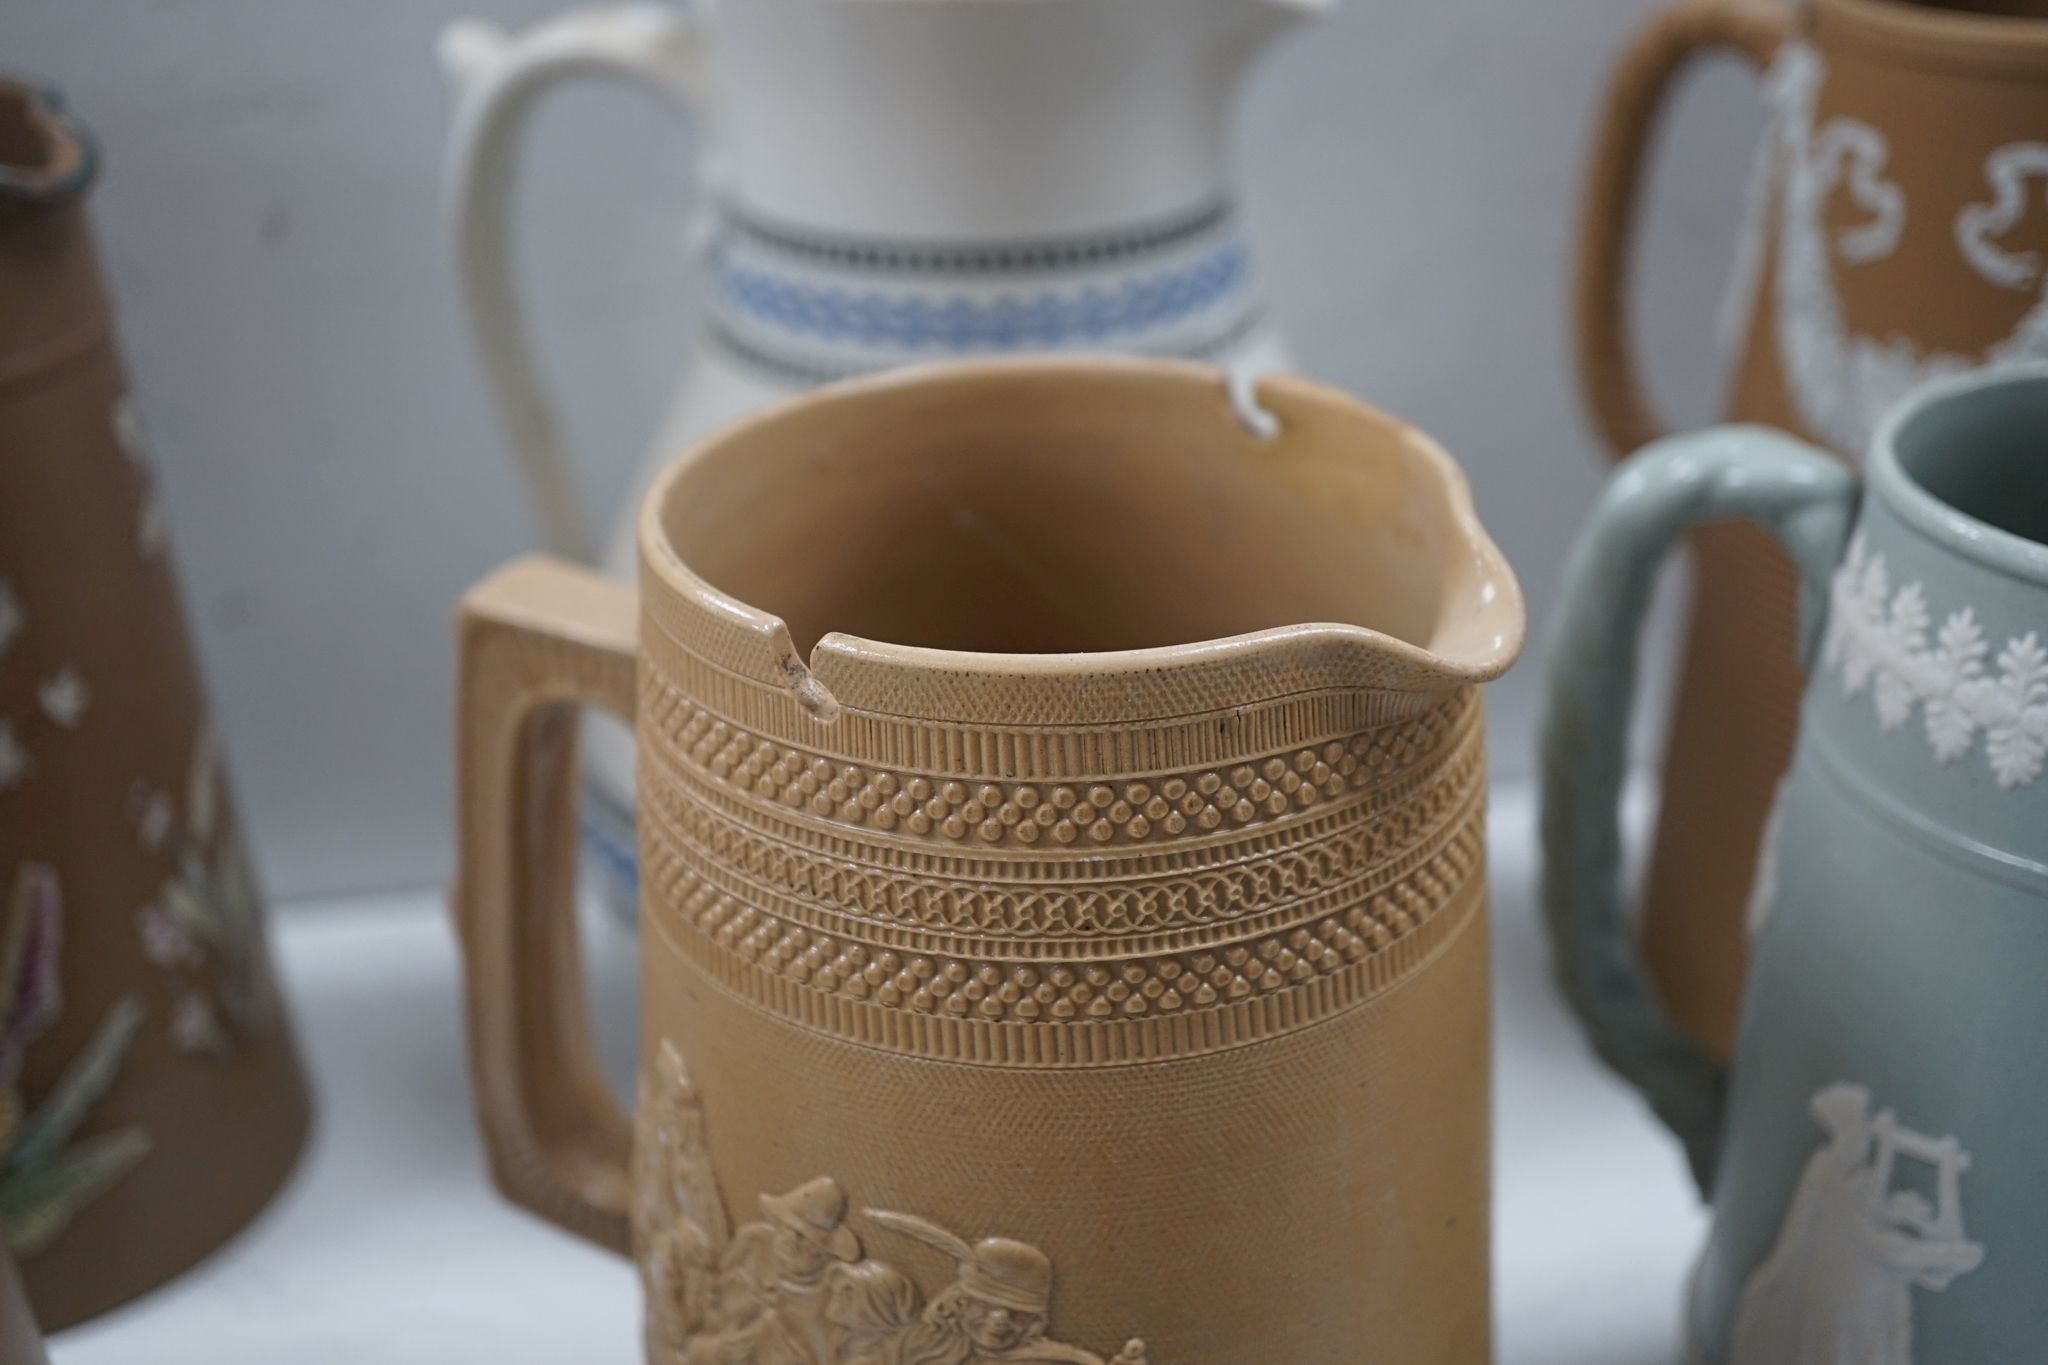 A collection of Dudson stoneware, including jugs, teapots, cream jugs etc, many decorated in low relief